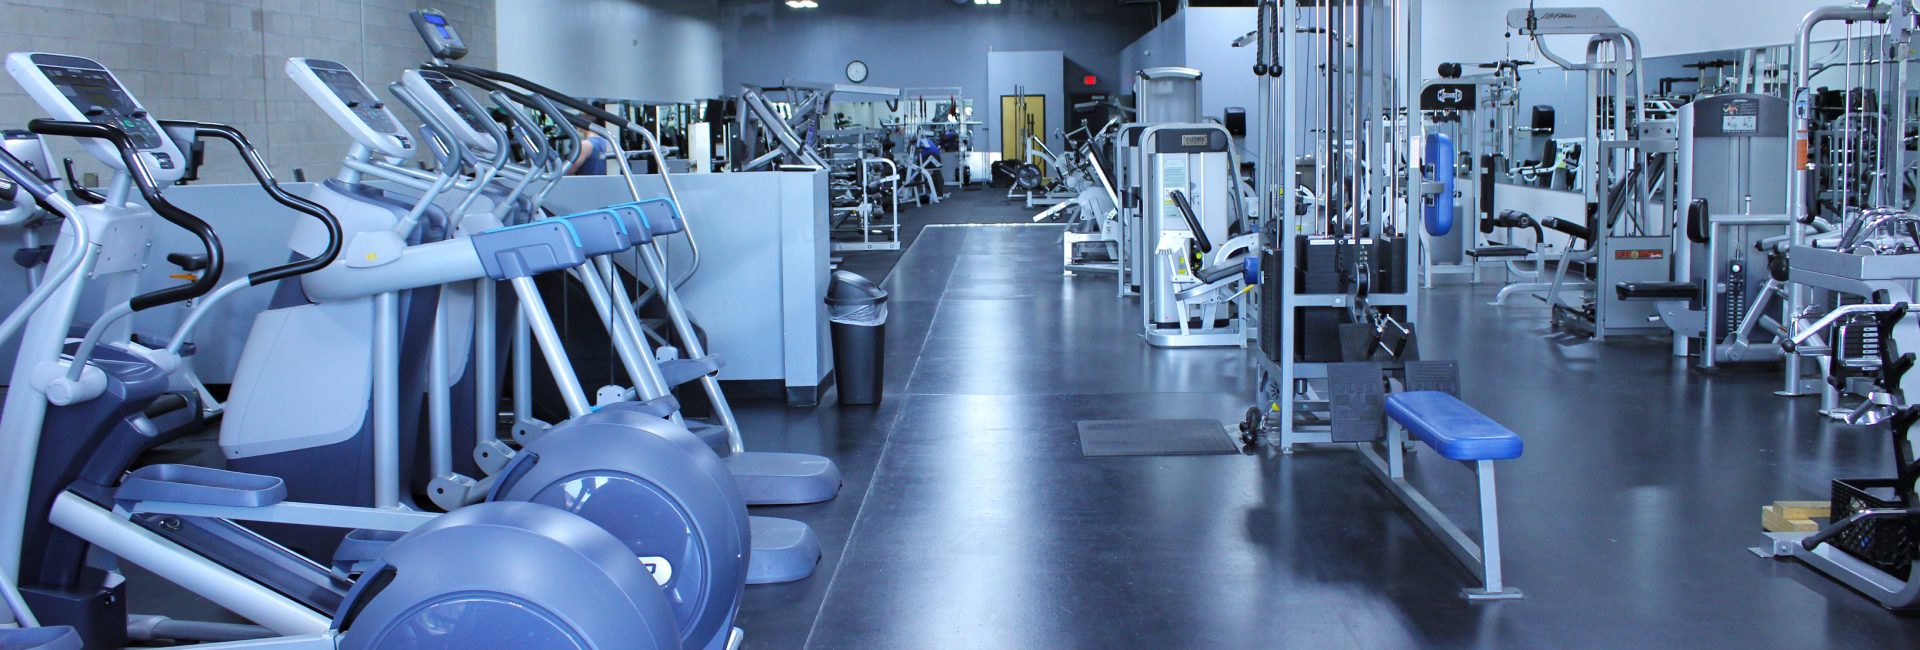 best 24 hour gyms in Albuquerque with amenities gym with modern equipment